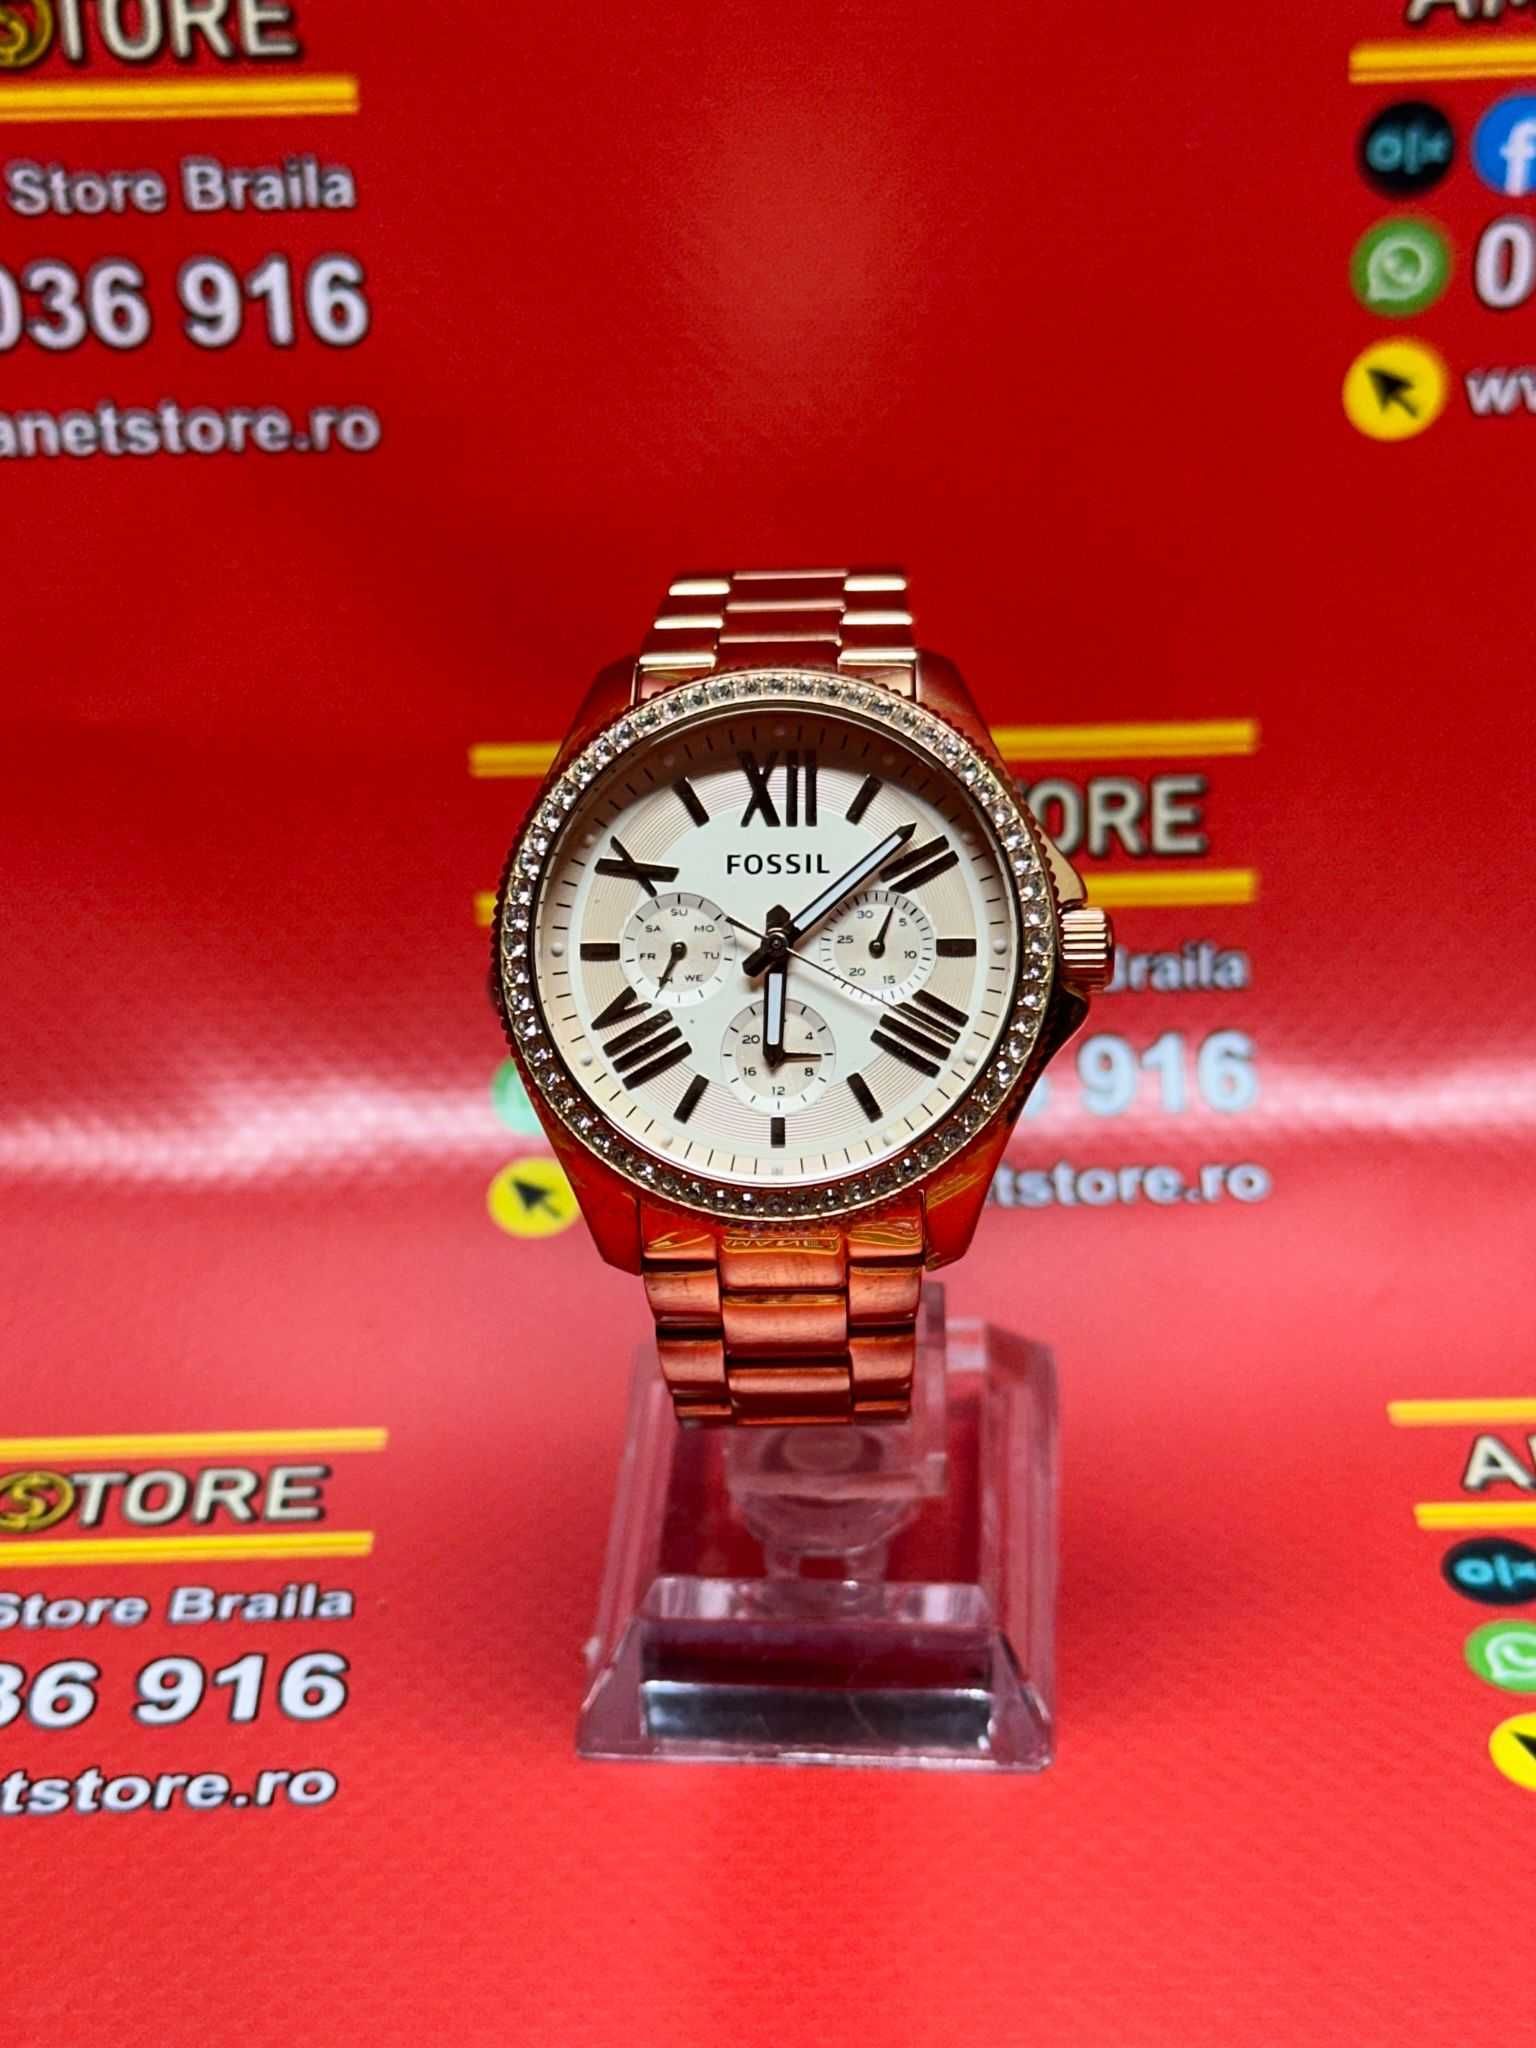 Fossil Cecile AM4483 Amanet Store Braila (9439)